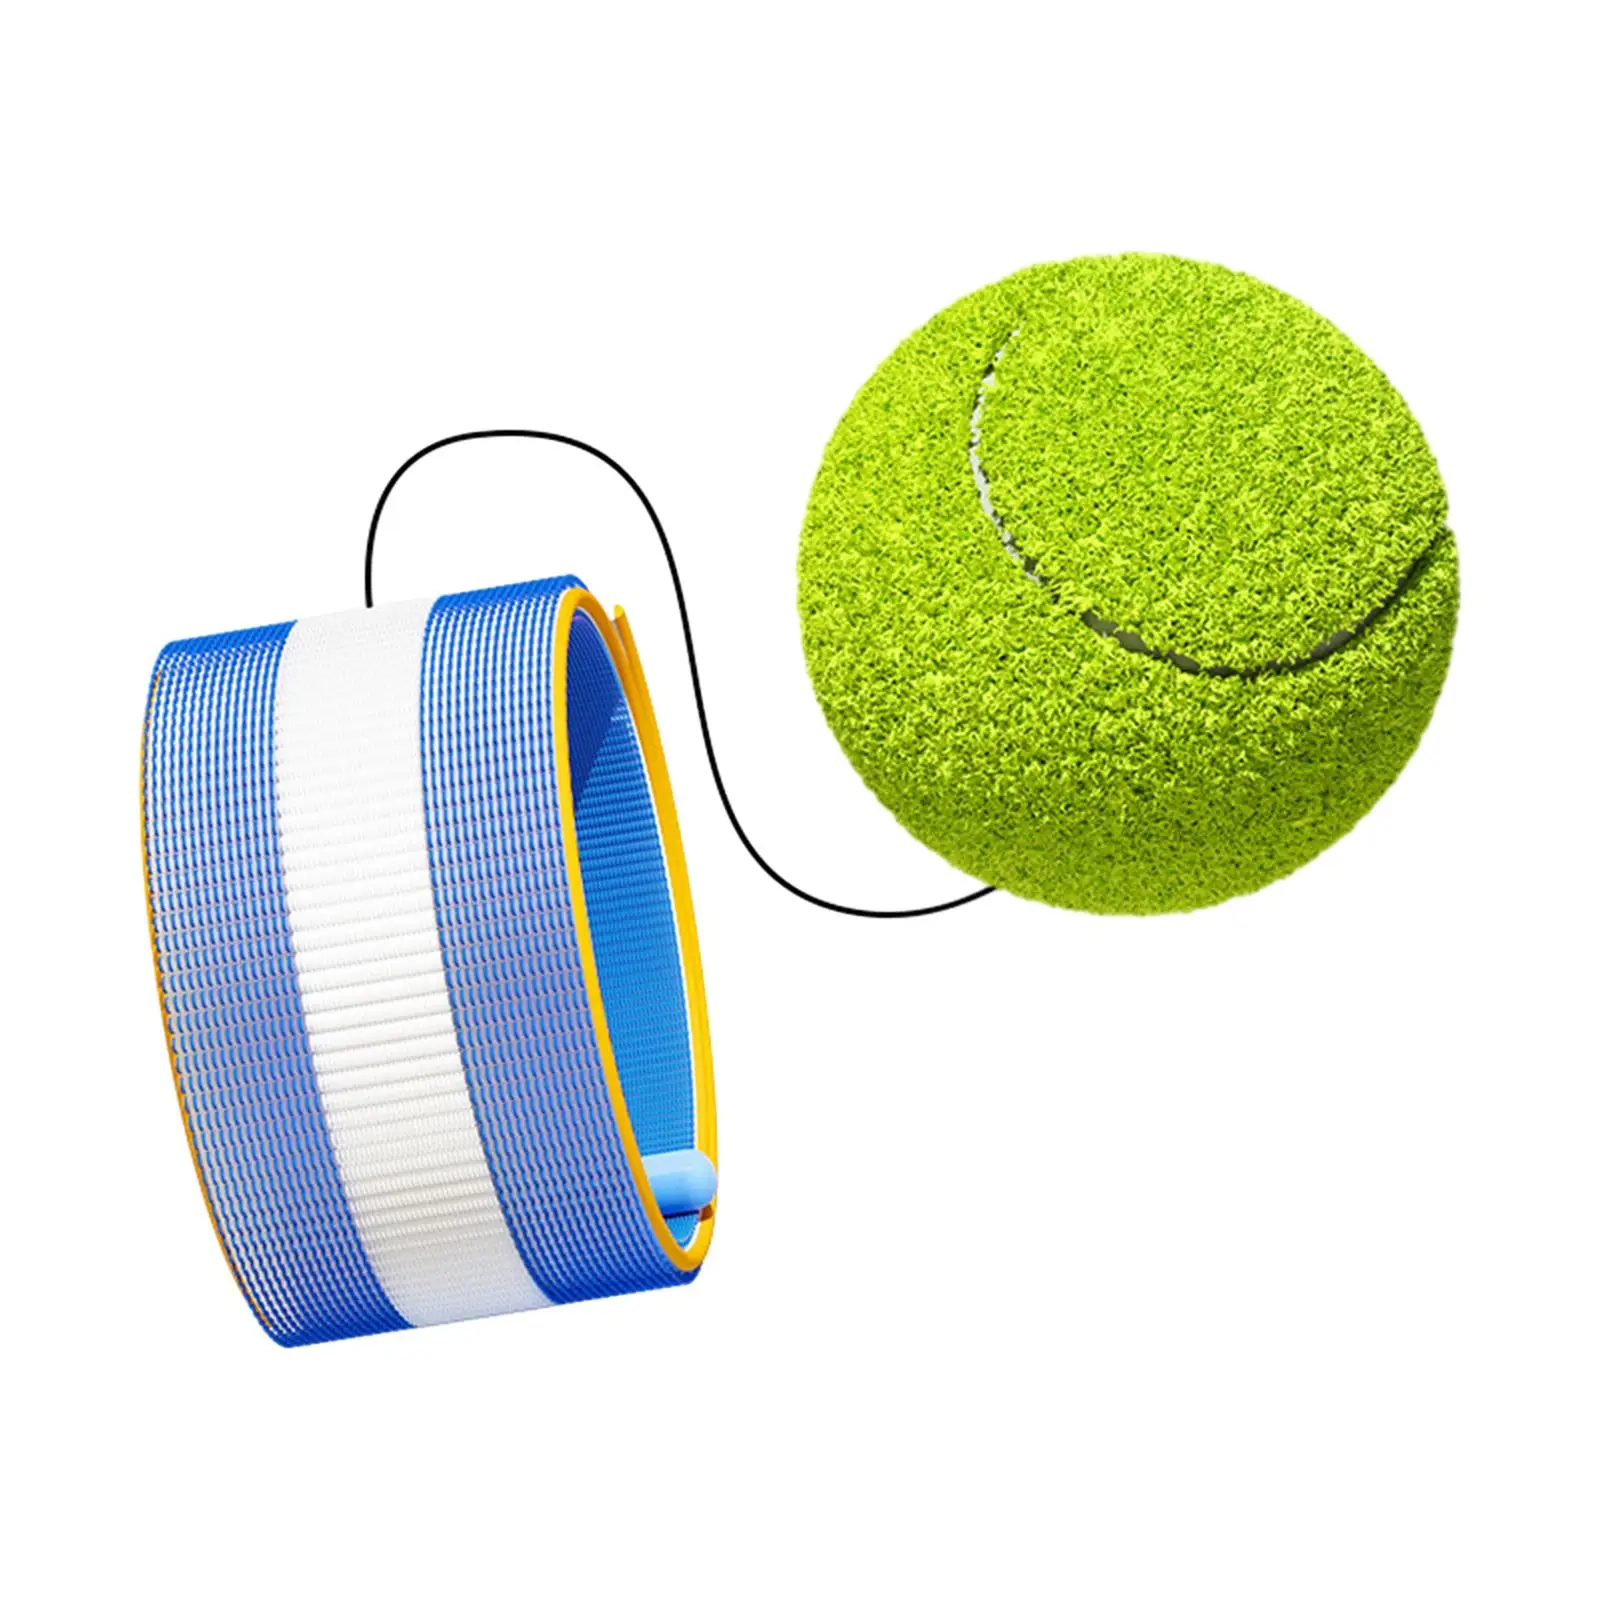 Wristband Toys Outdoor Baseball Rubber Rebound Ball for Teens Adults Gifts